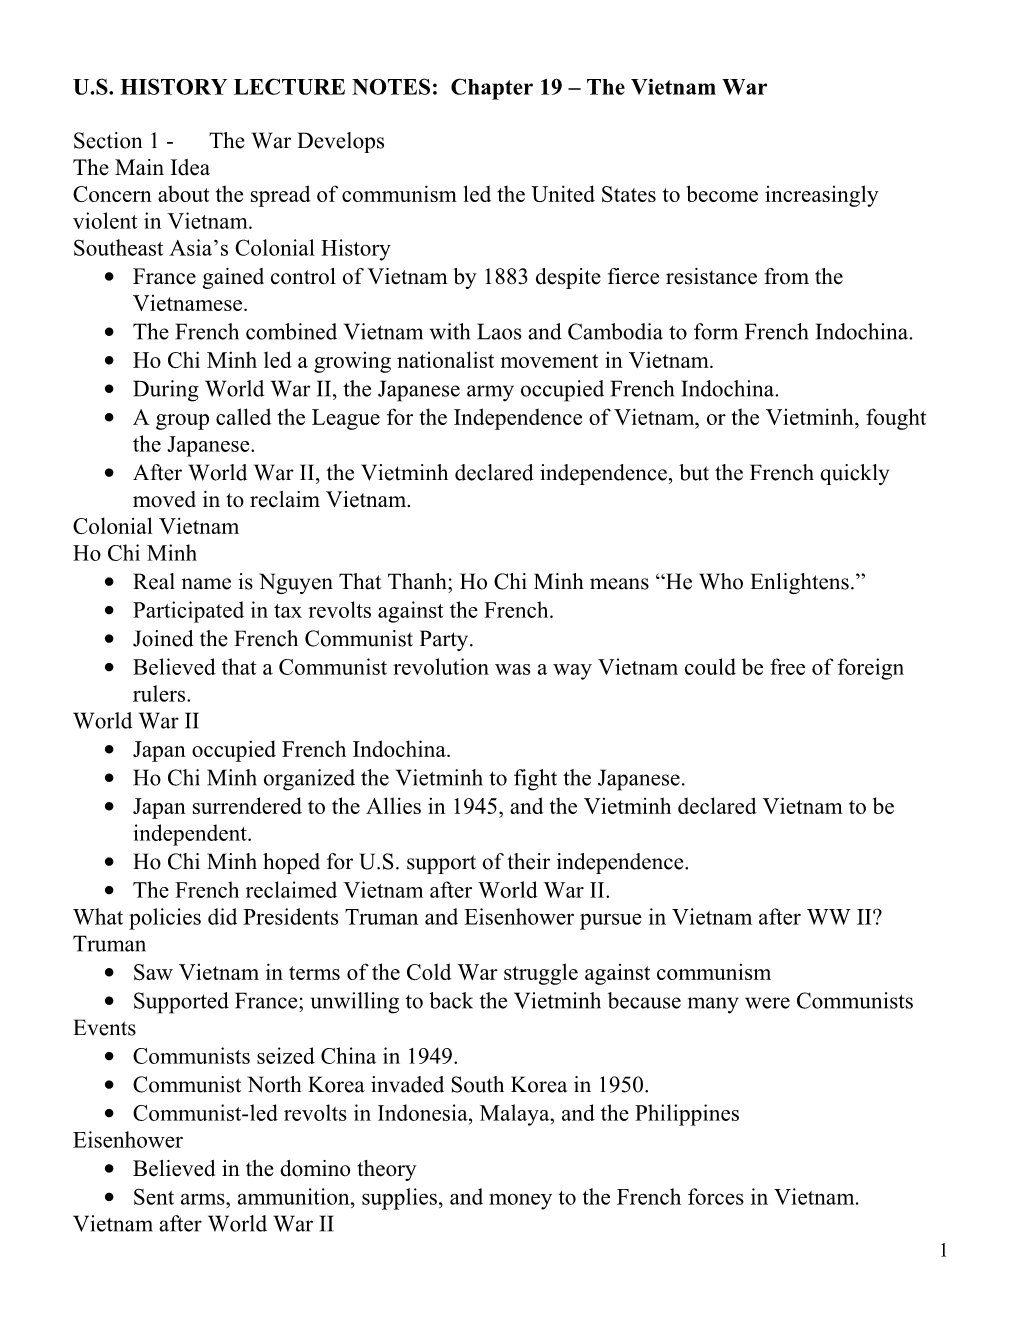 U.S. HISTORY LECTURE NOTES: Chapter 19 the Vietnam War